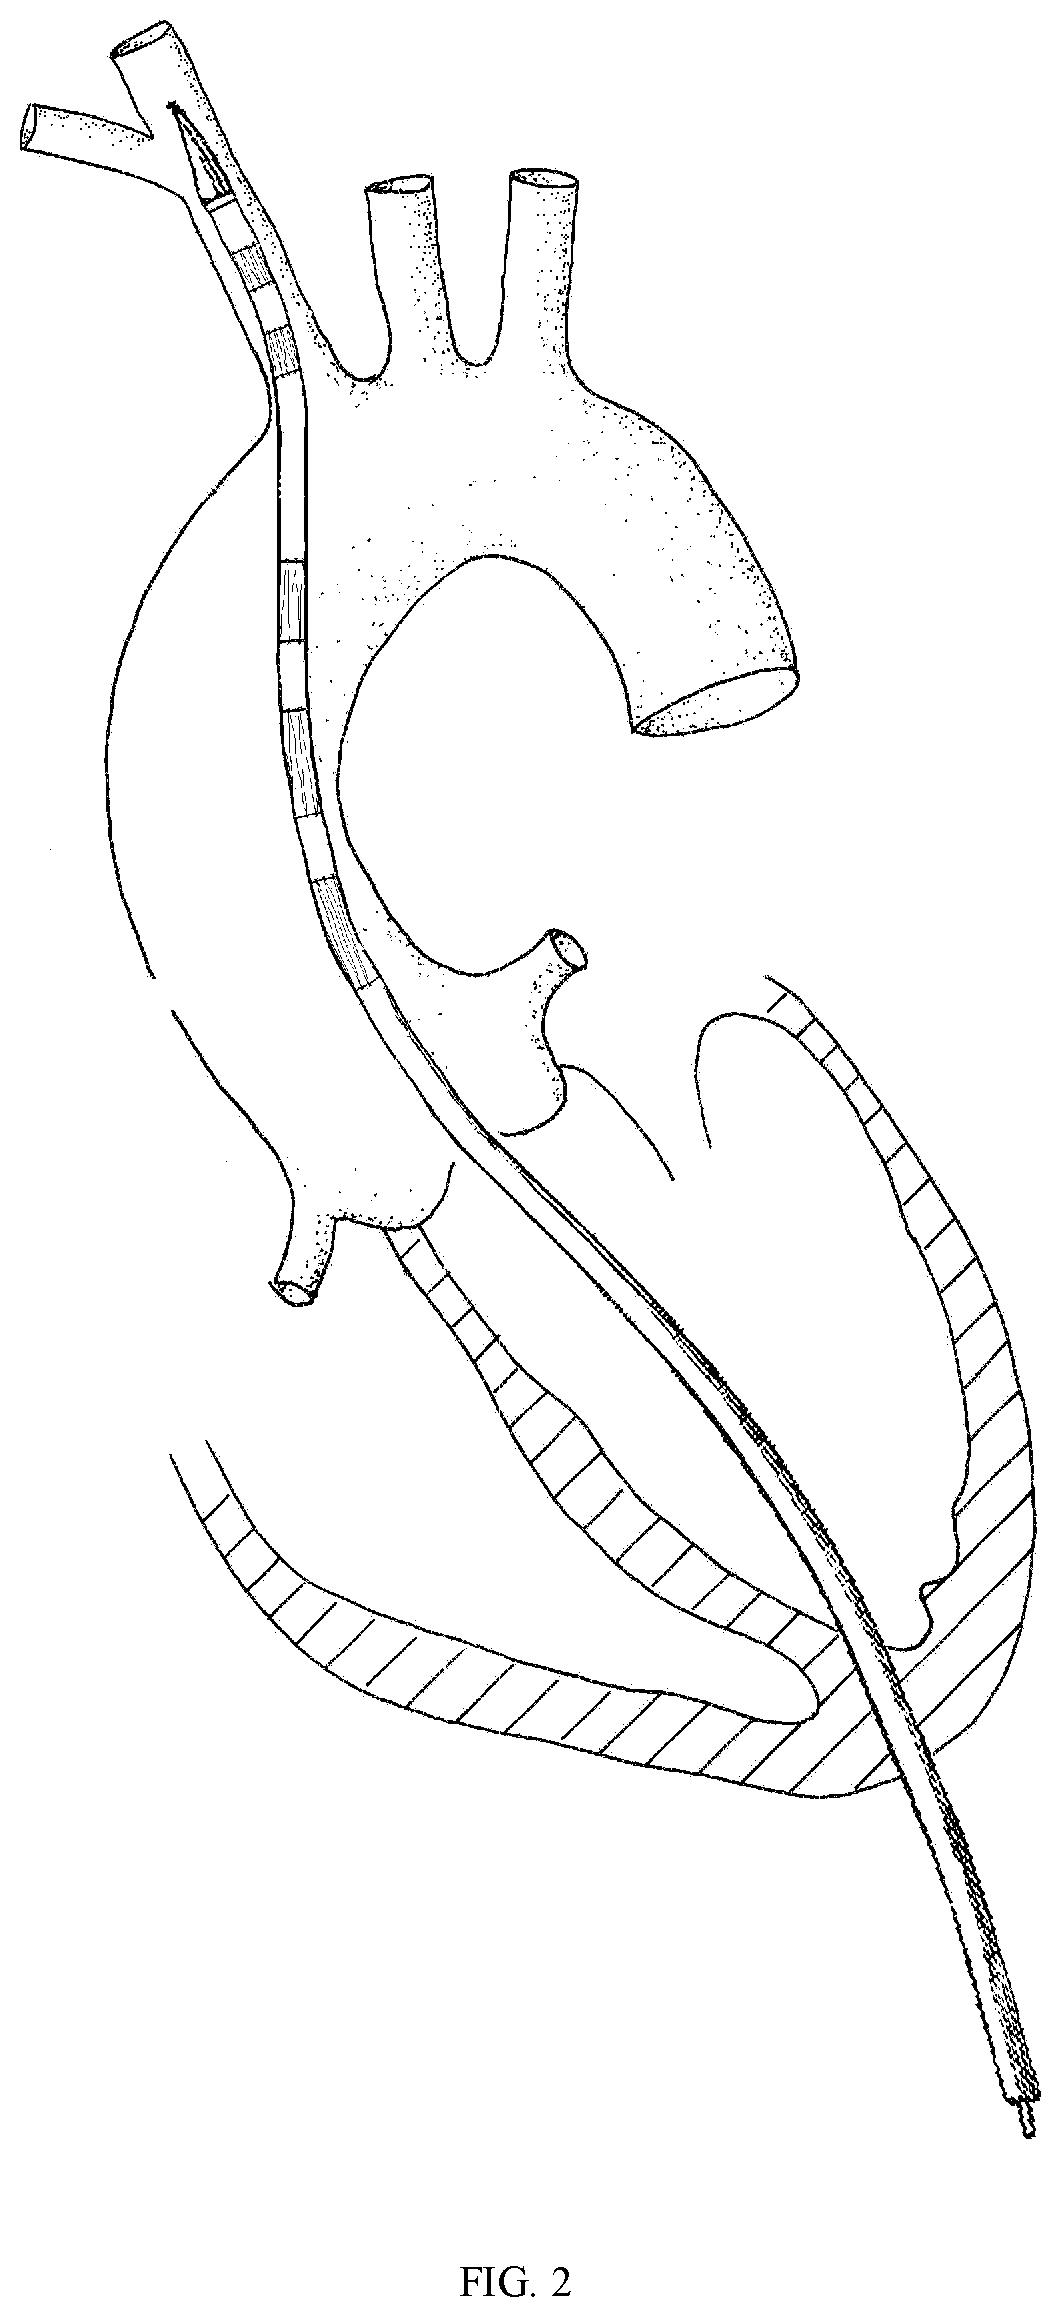 A transapical anatomical stent to repair ascending aorta and hemi arch